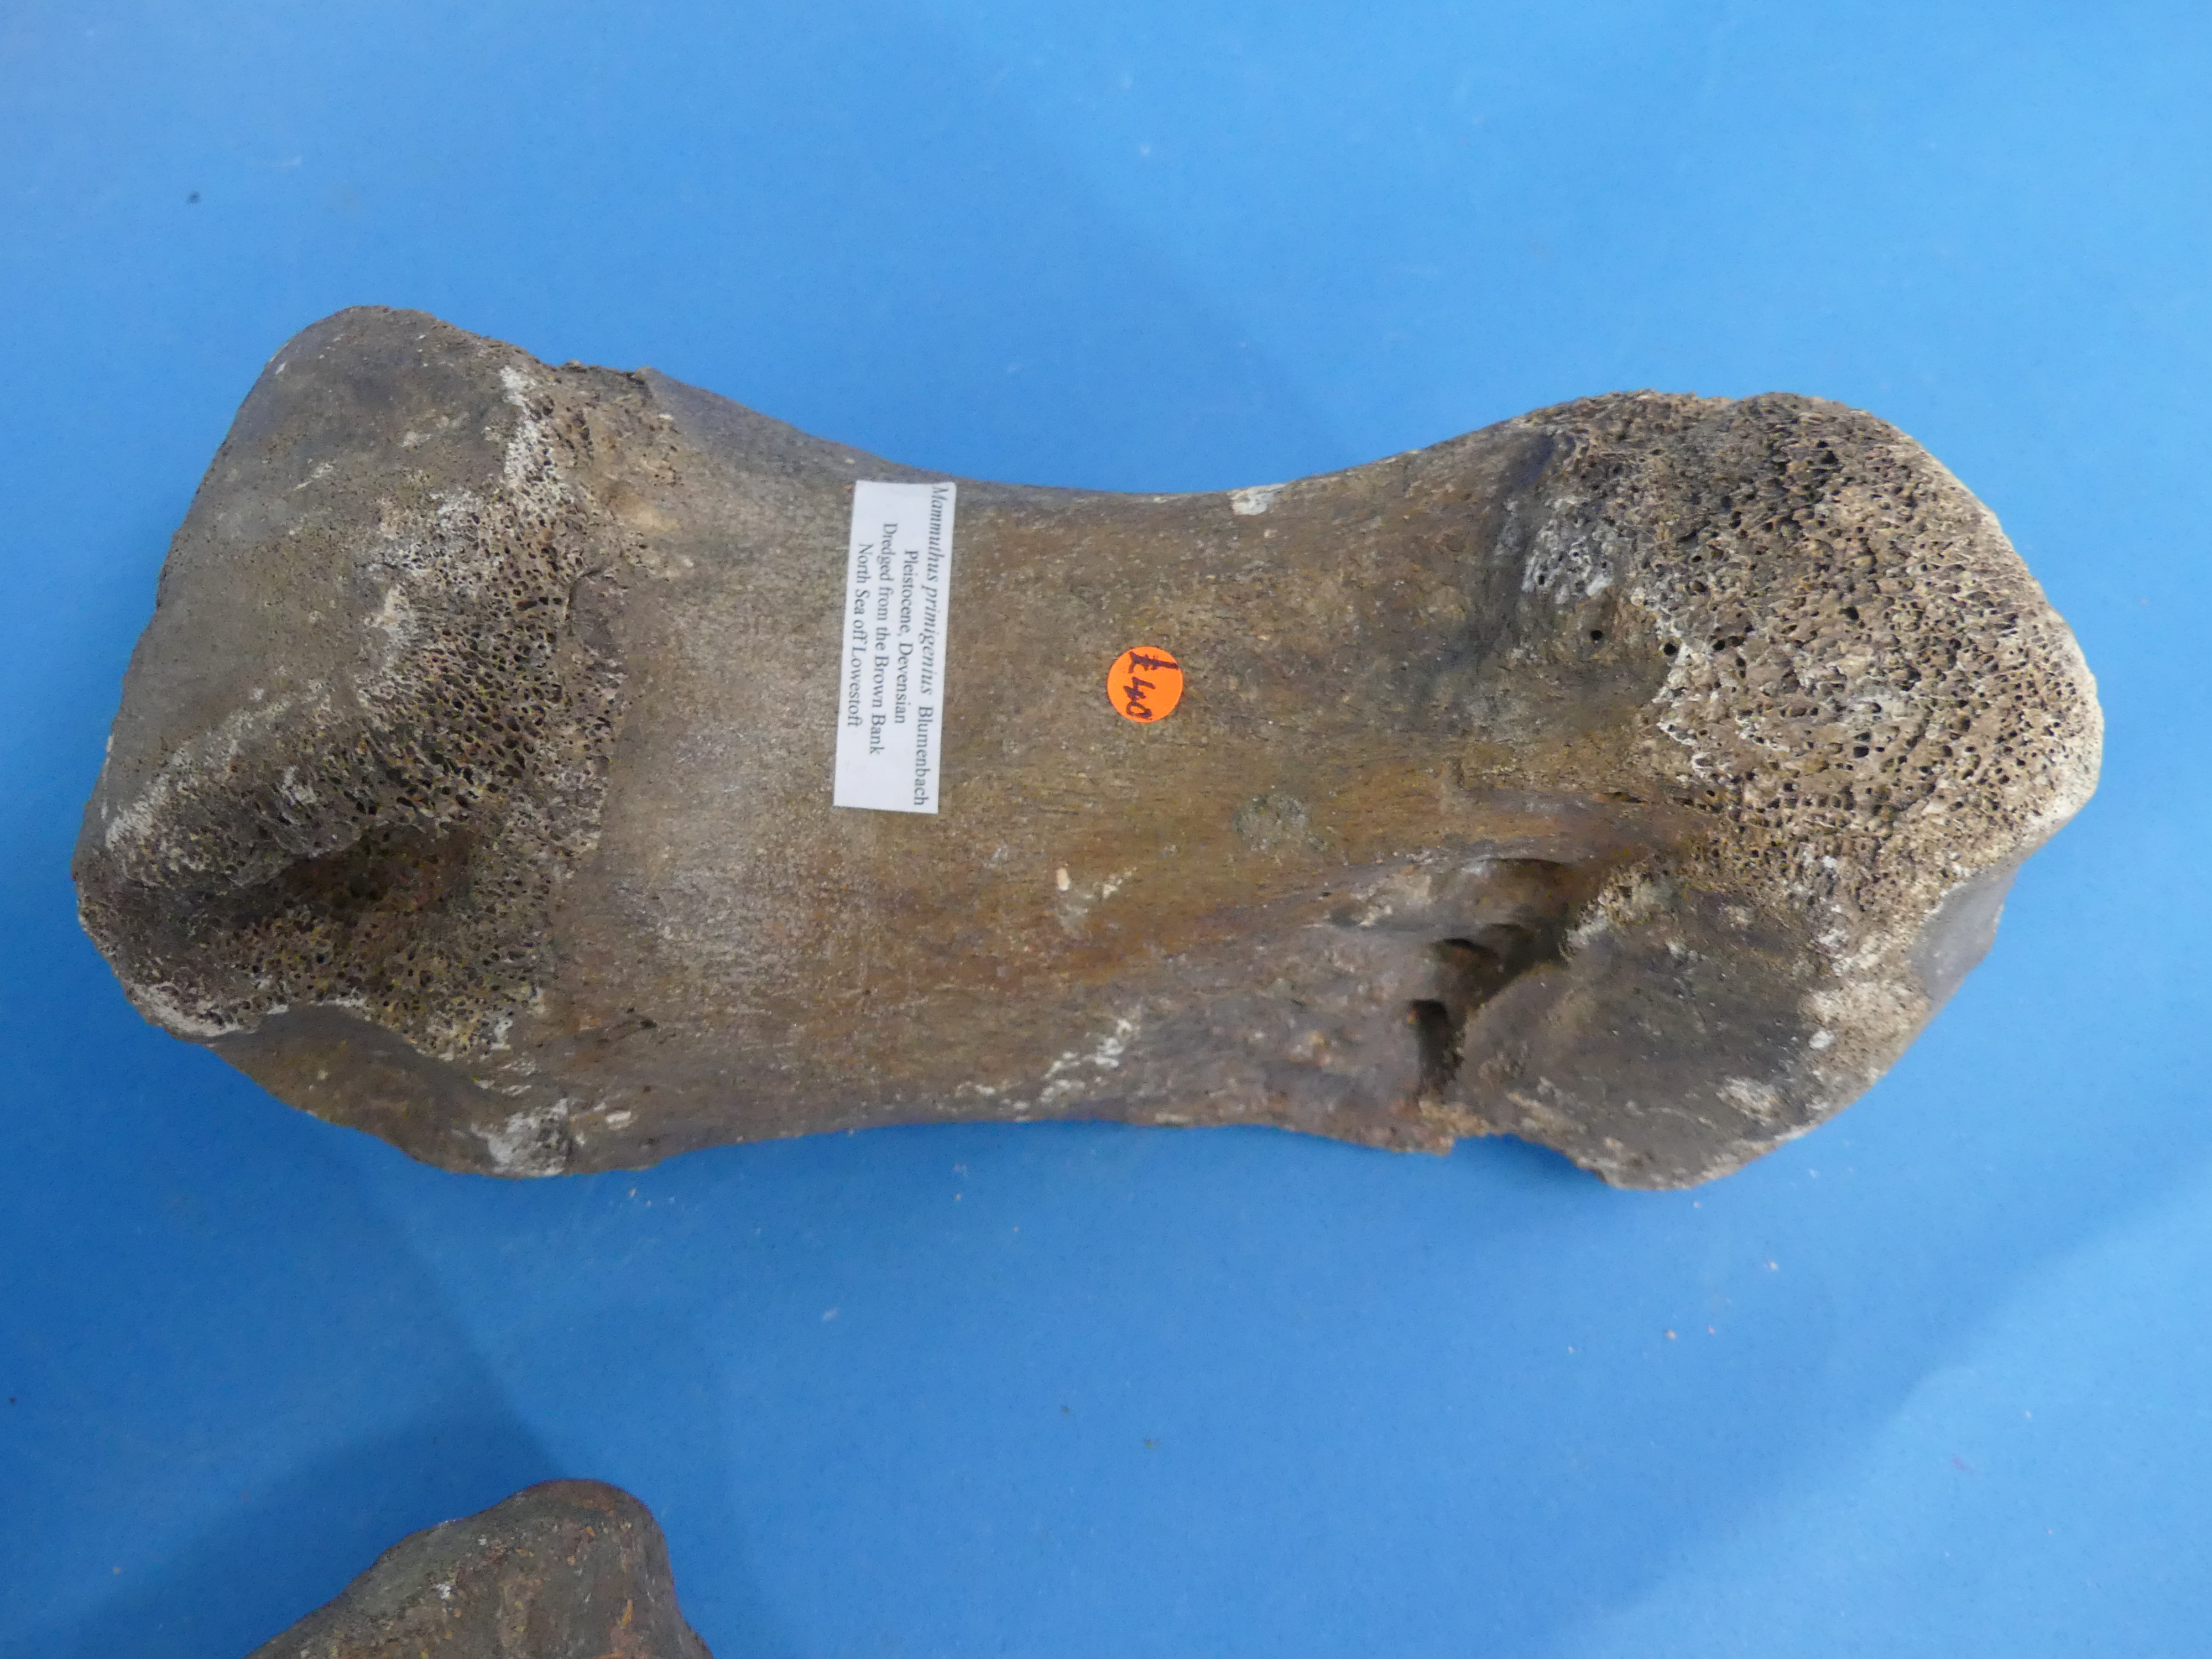 Natural History, Paleontology and Minerals; Two Iguanodon Bone Fossil Specimens, Cretaceous - Image 8 of 8